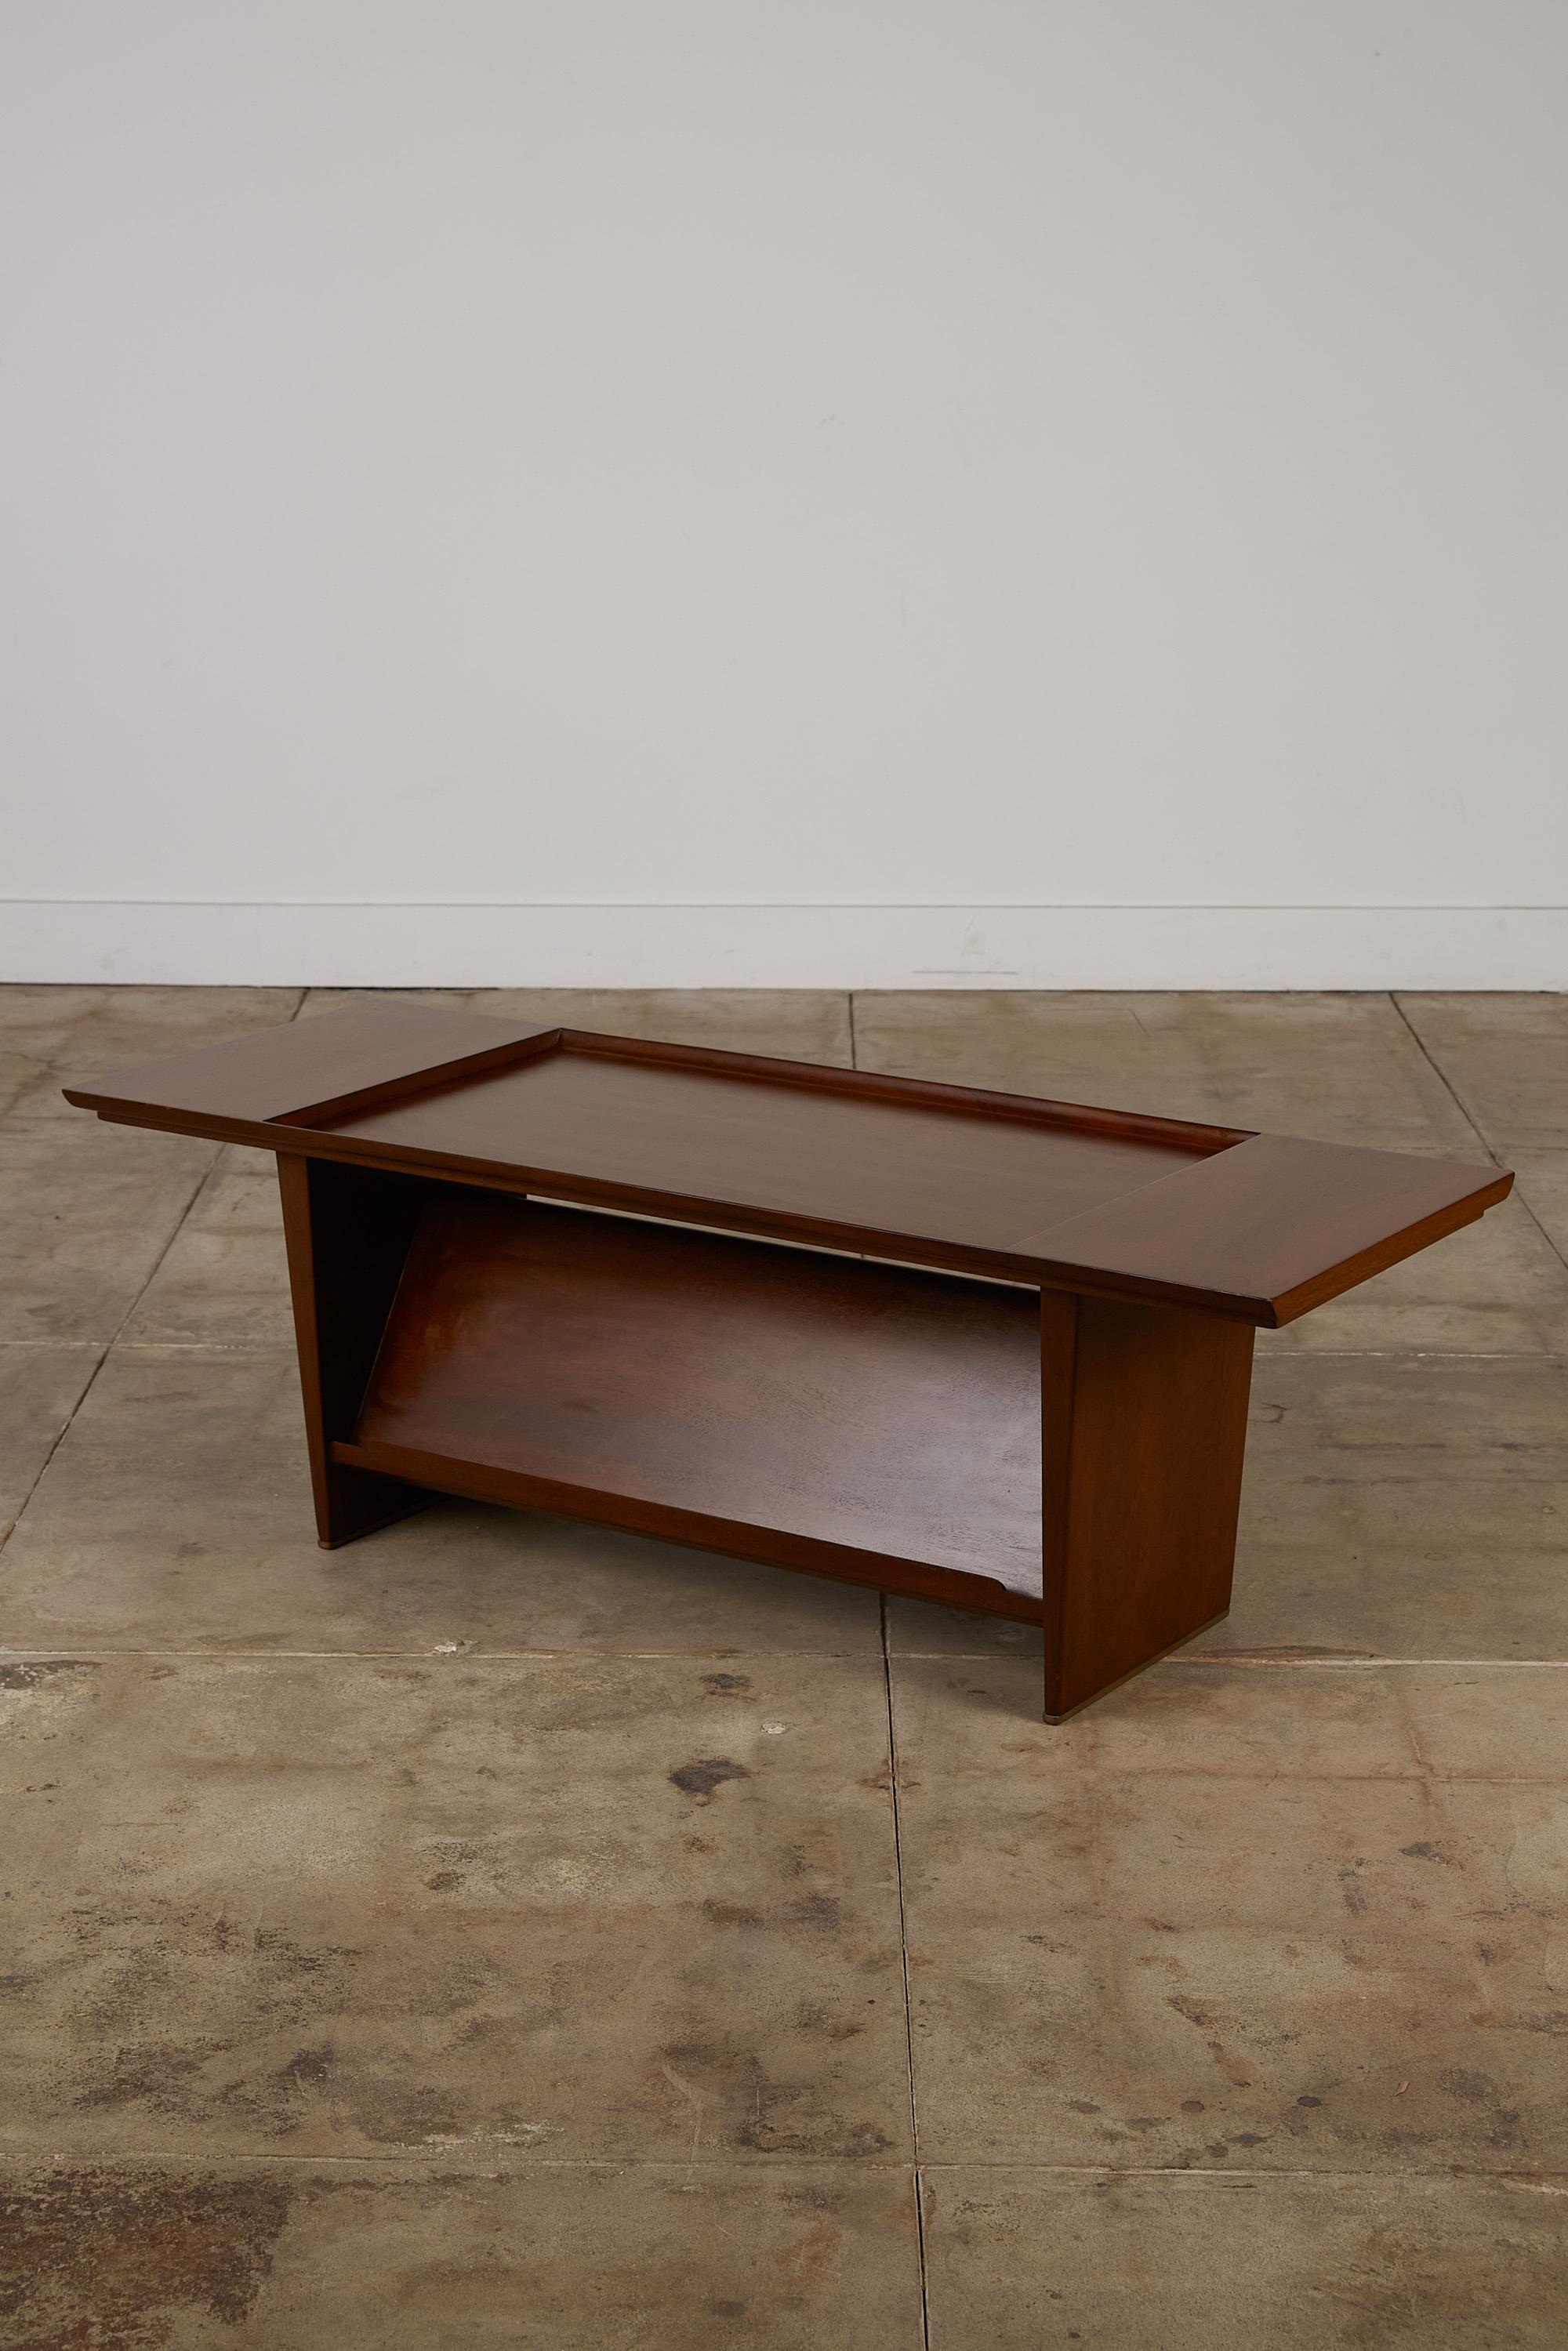 A mahogany coffee table for home or office, with a built-in display shelf, designed by Edward Wormley for Dunbar. The understated design has a rectangular top with a recessed well in the centre. Two mahogany panel trestles support the tabletop and